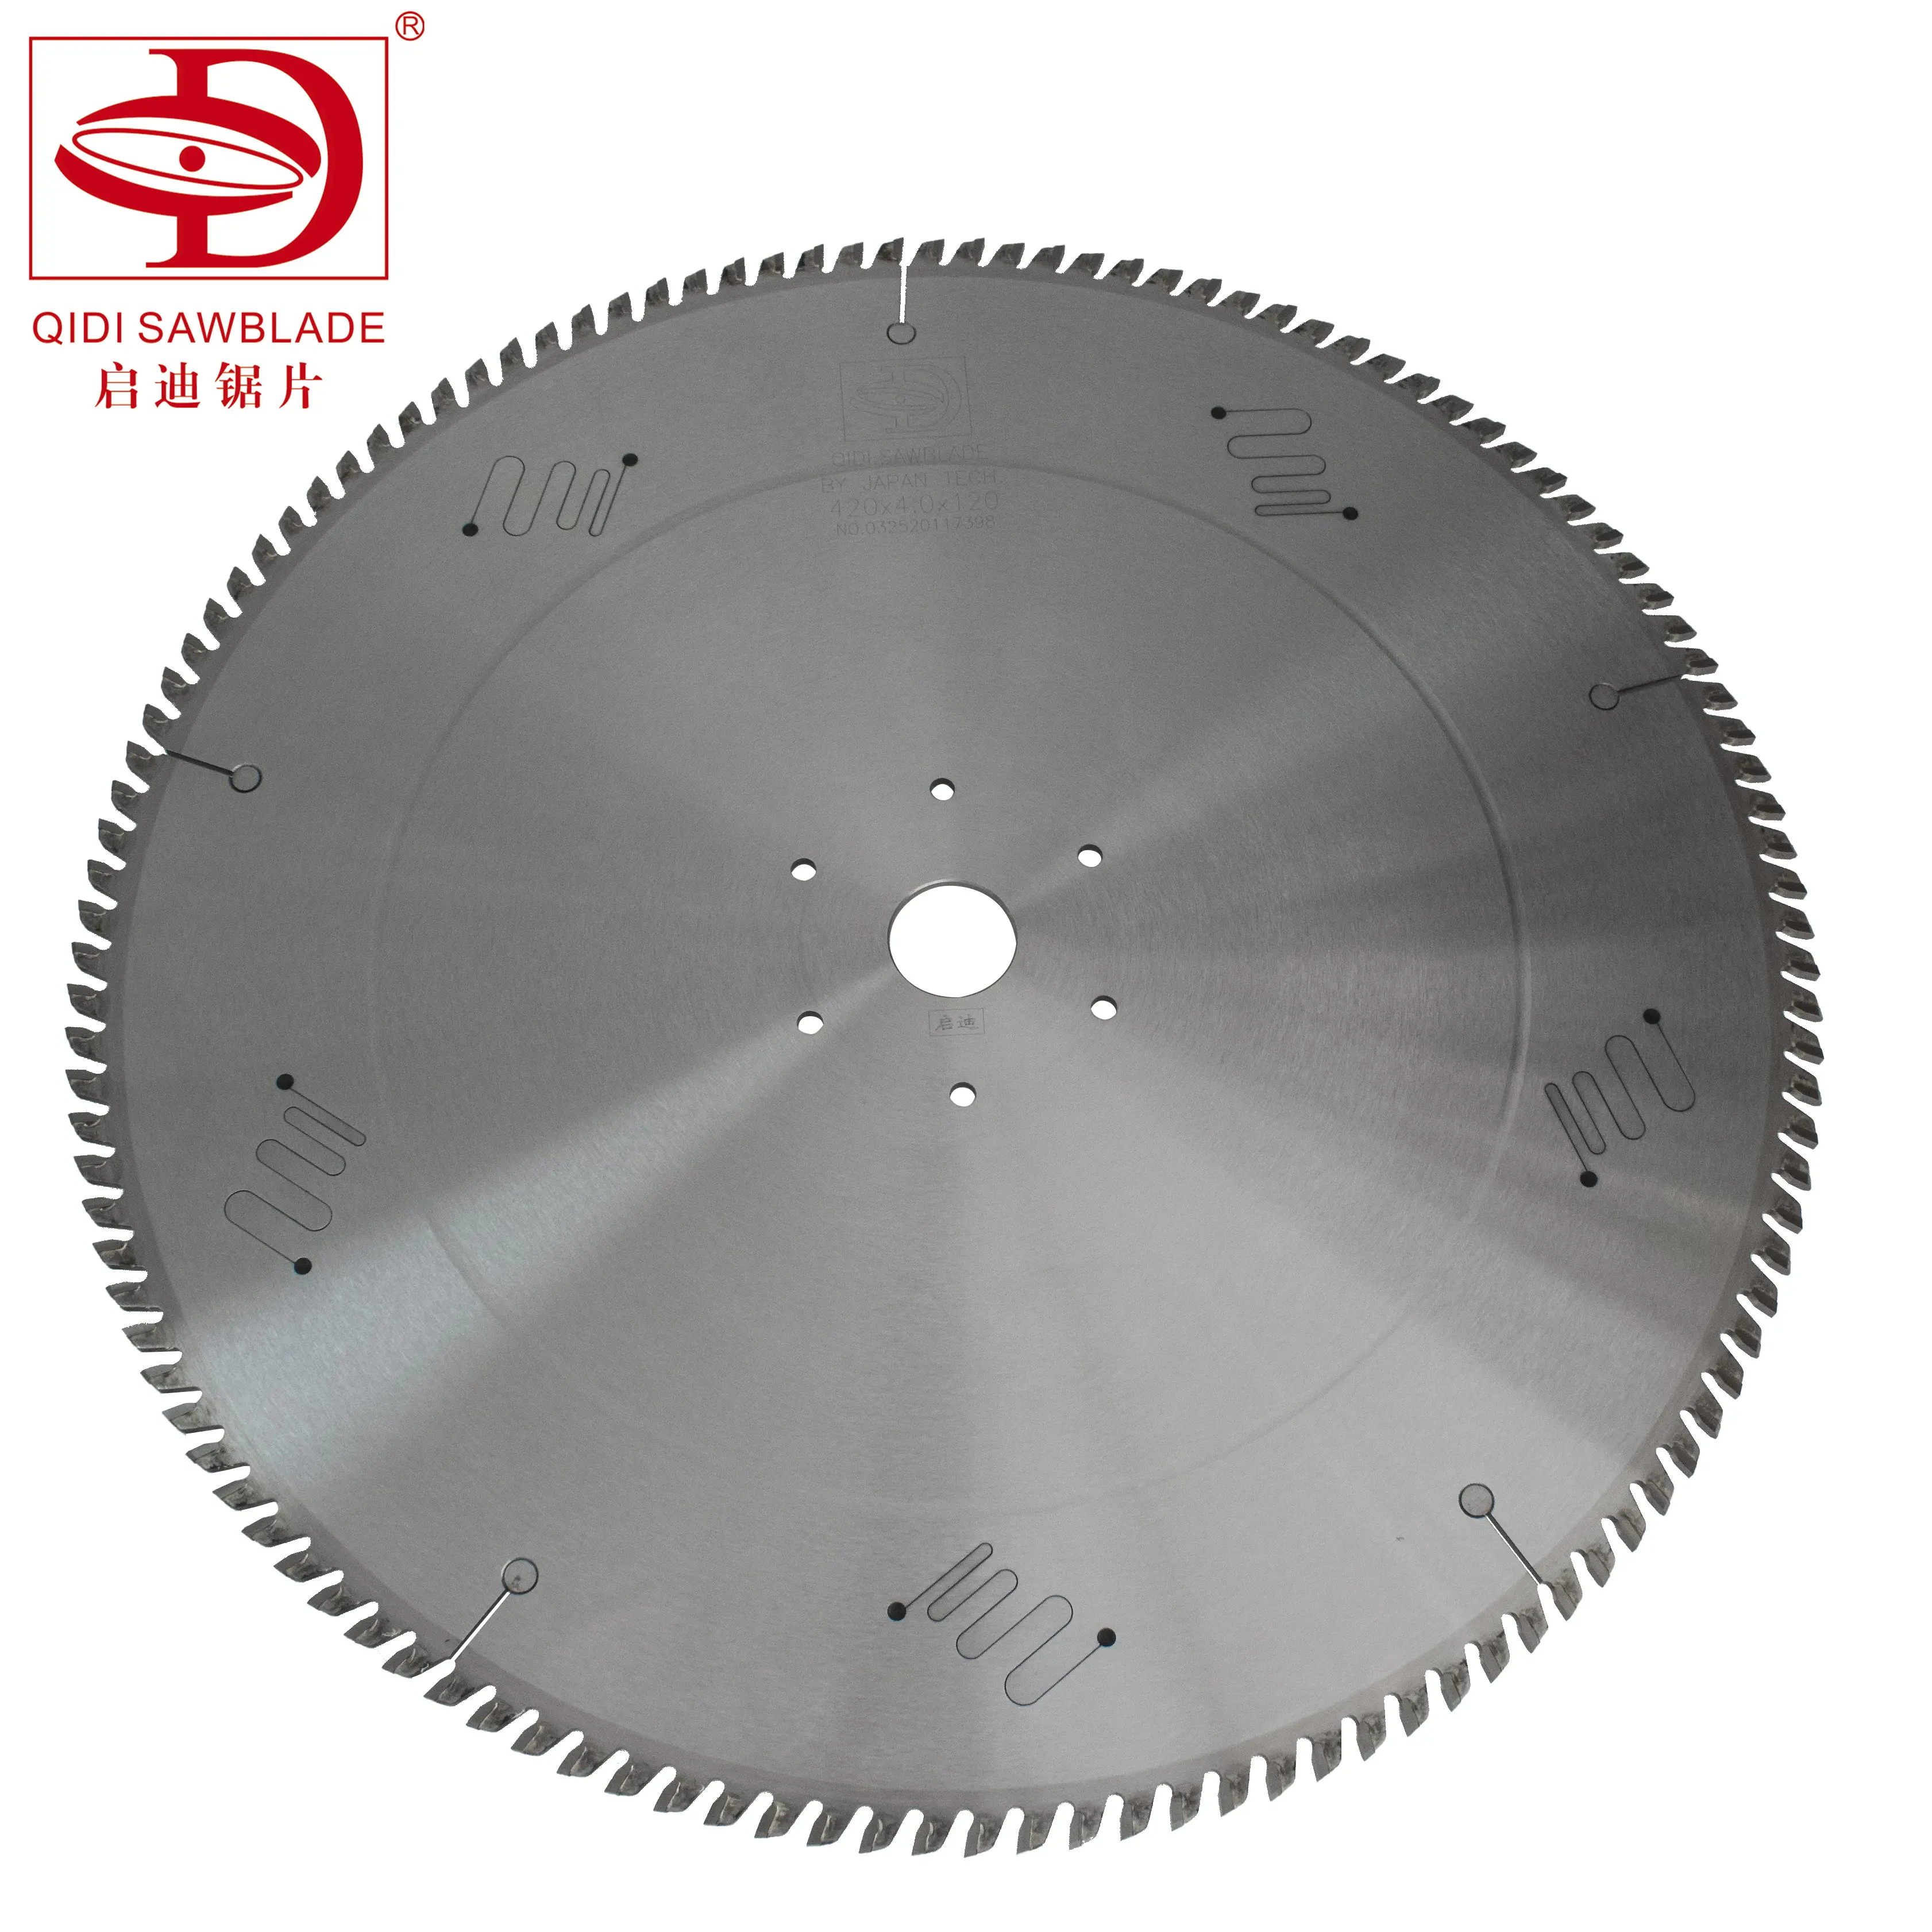 19125 EXTOL Craft 60T TCT Saw Blade with Carbide Blade for Aluminum Cutting Wood cutting